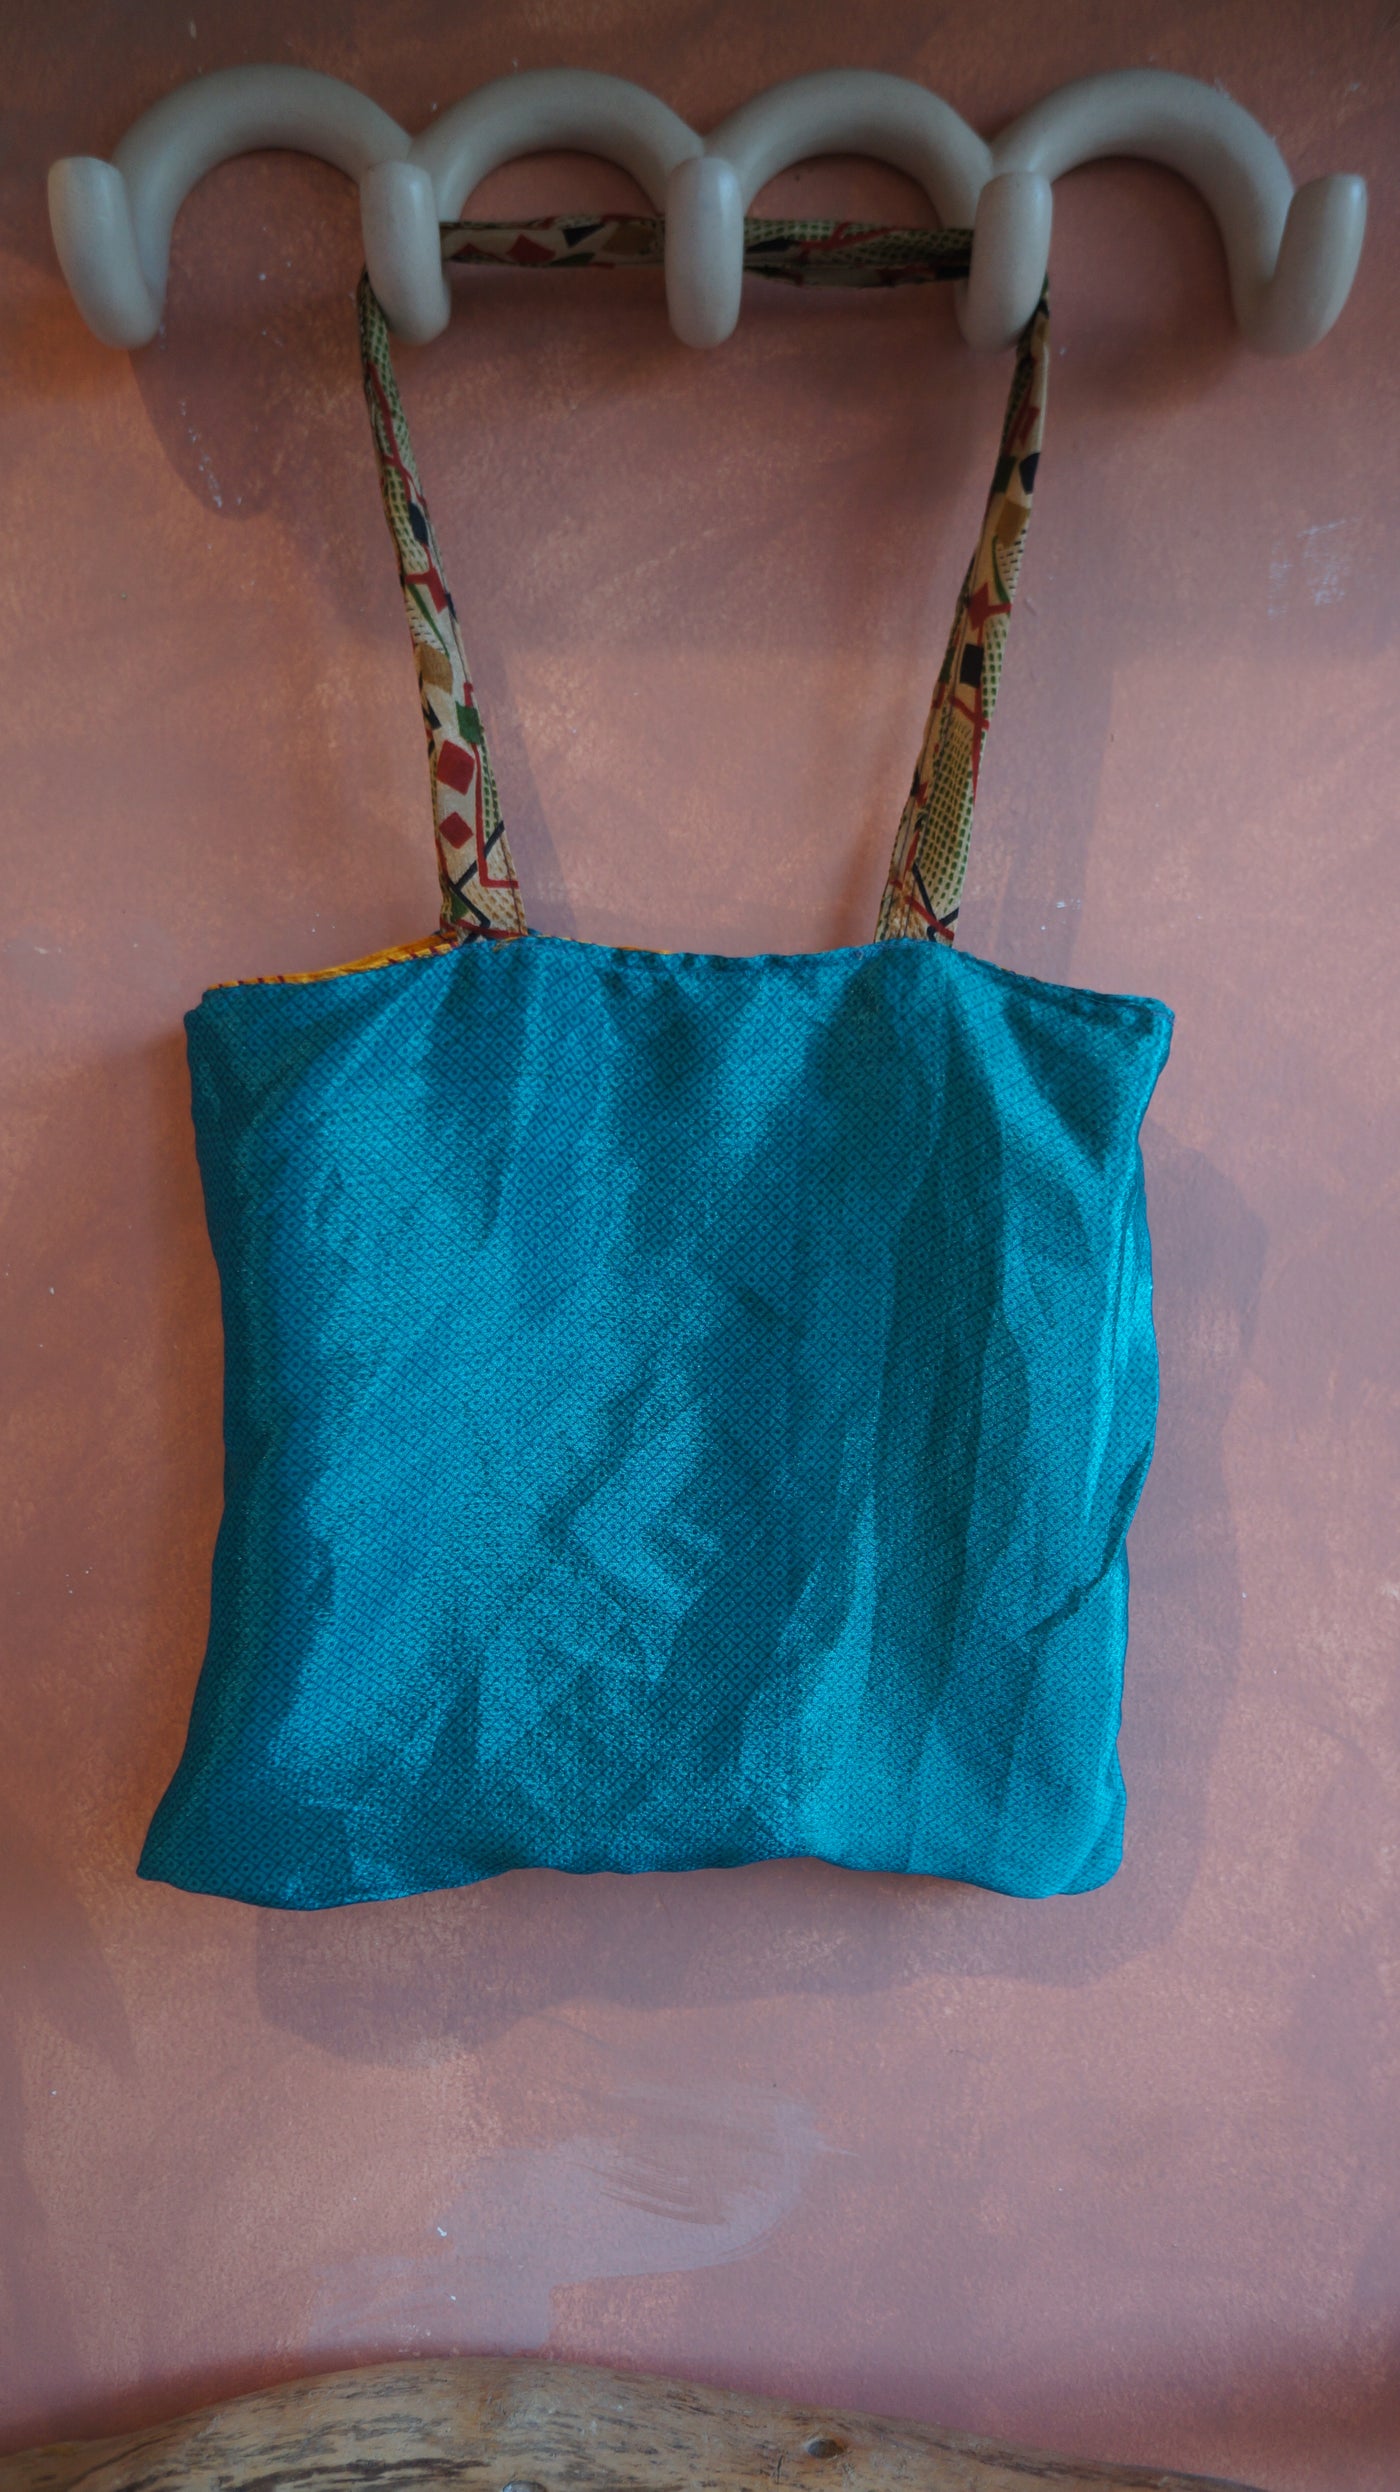 Chiquito Silk Bag - Mustard and Blue (CH2409)